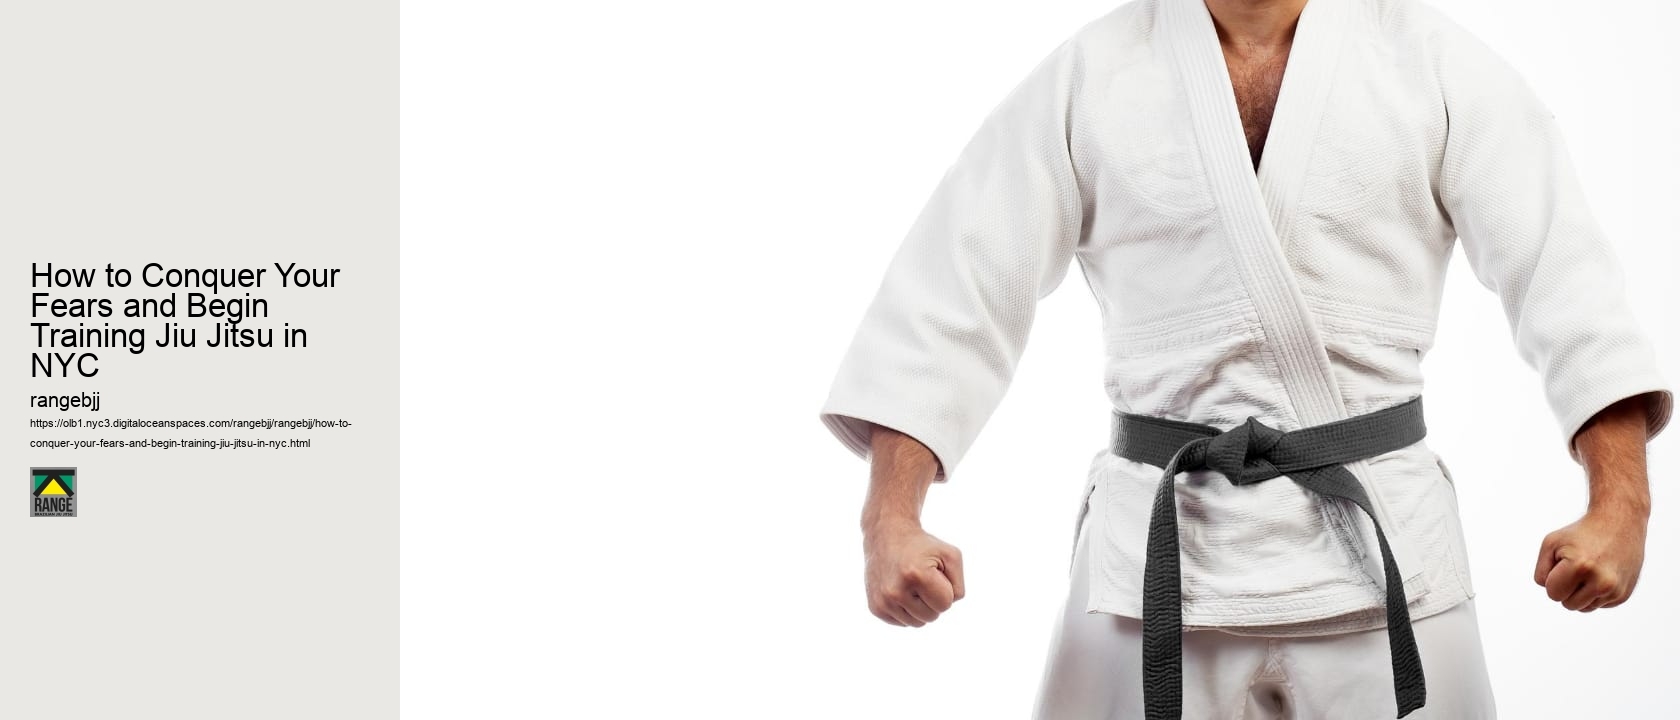 How to Conquer Your Fears and Begin Training Jiu Jitsu in NYC 